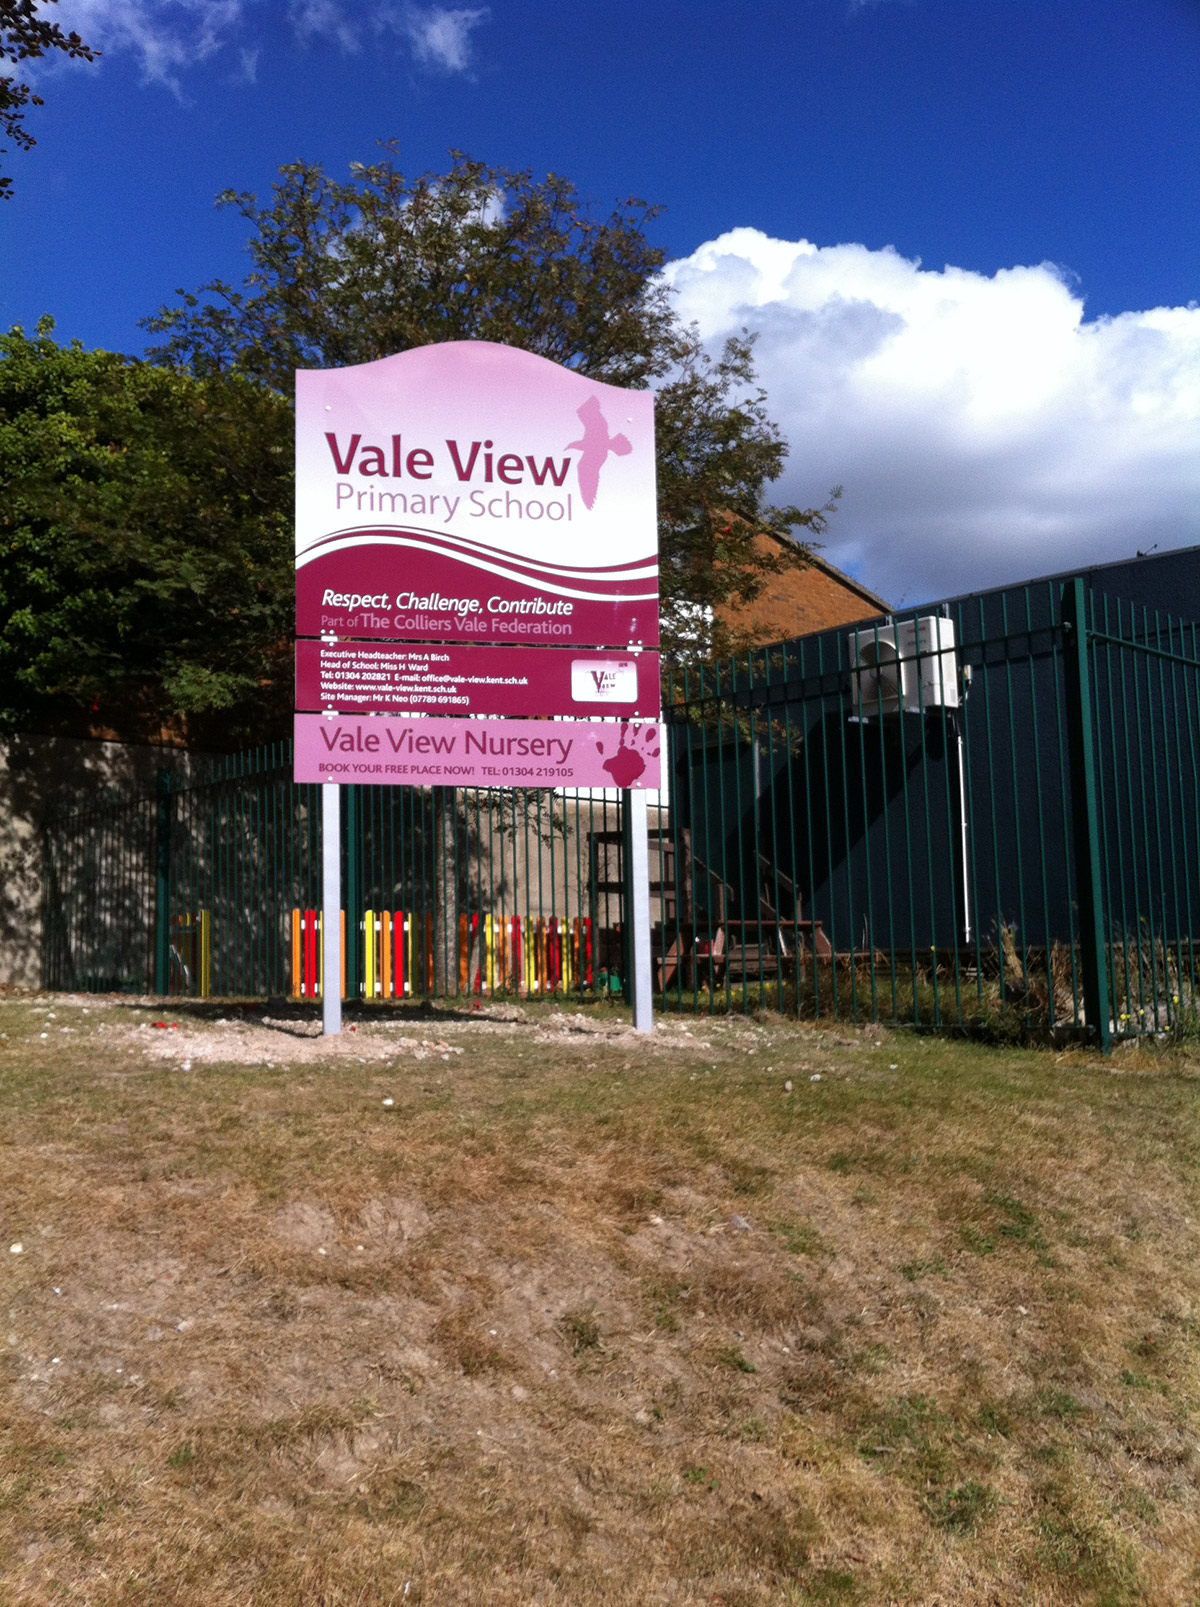 Vale View Primary School post mounted sign